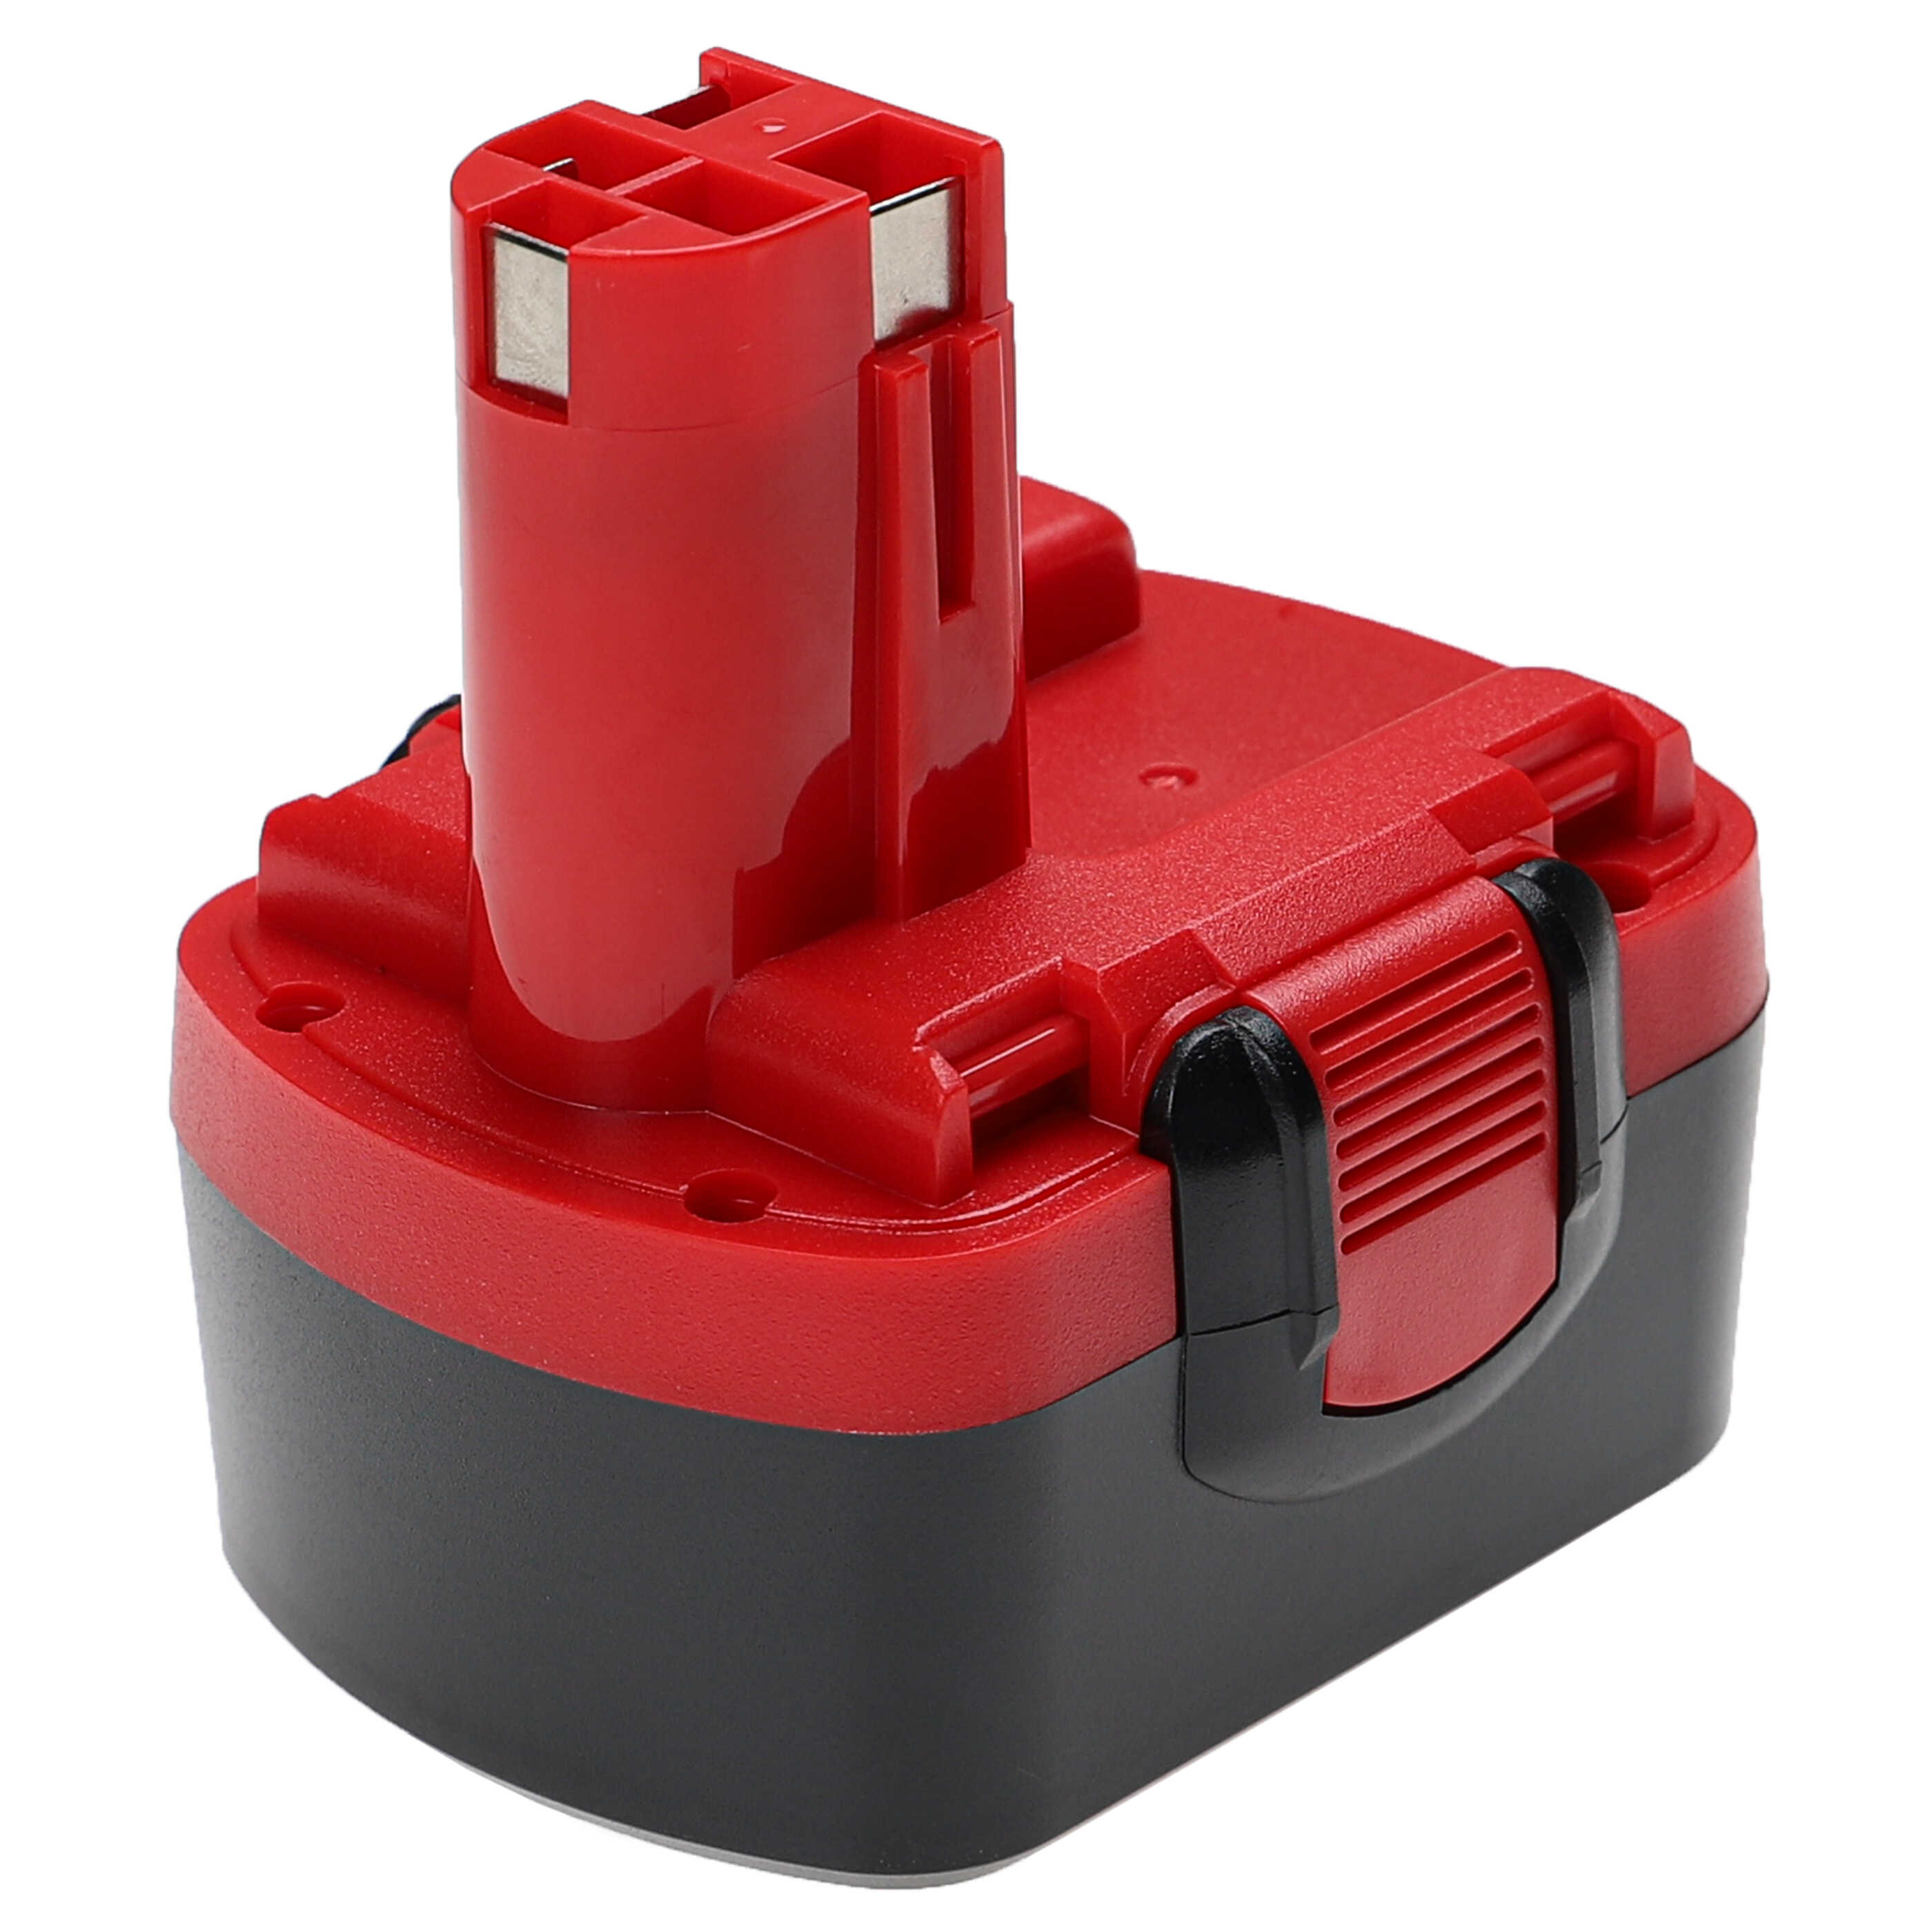 Electric Power Tool Battery (2x Unit) Replaces Bosch 2 607 335 263, 1617S0004W - 2000 mAh, 14.4 V, NiMH